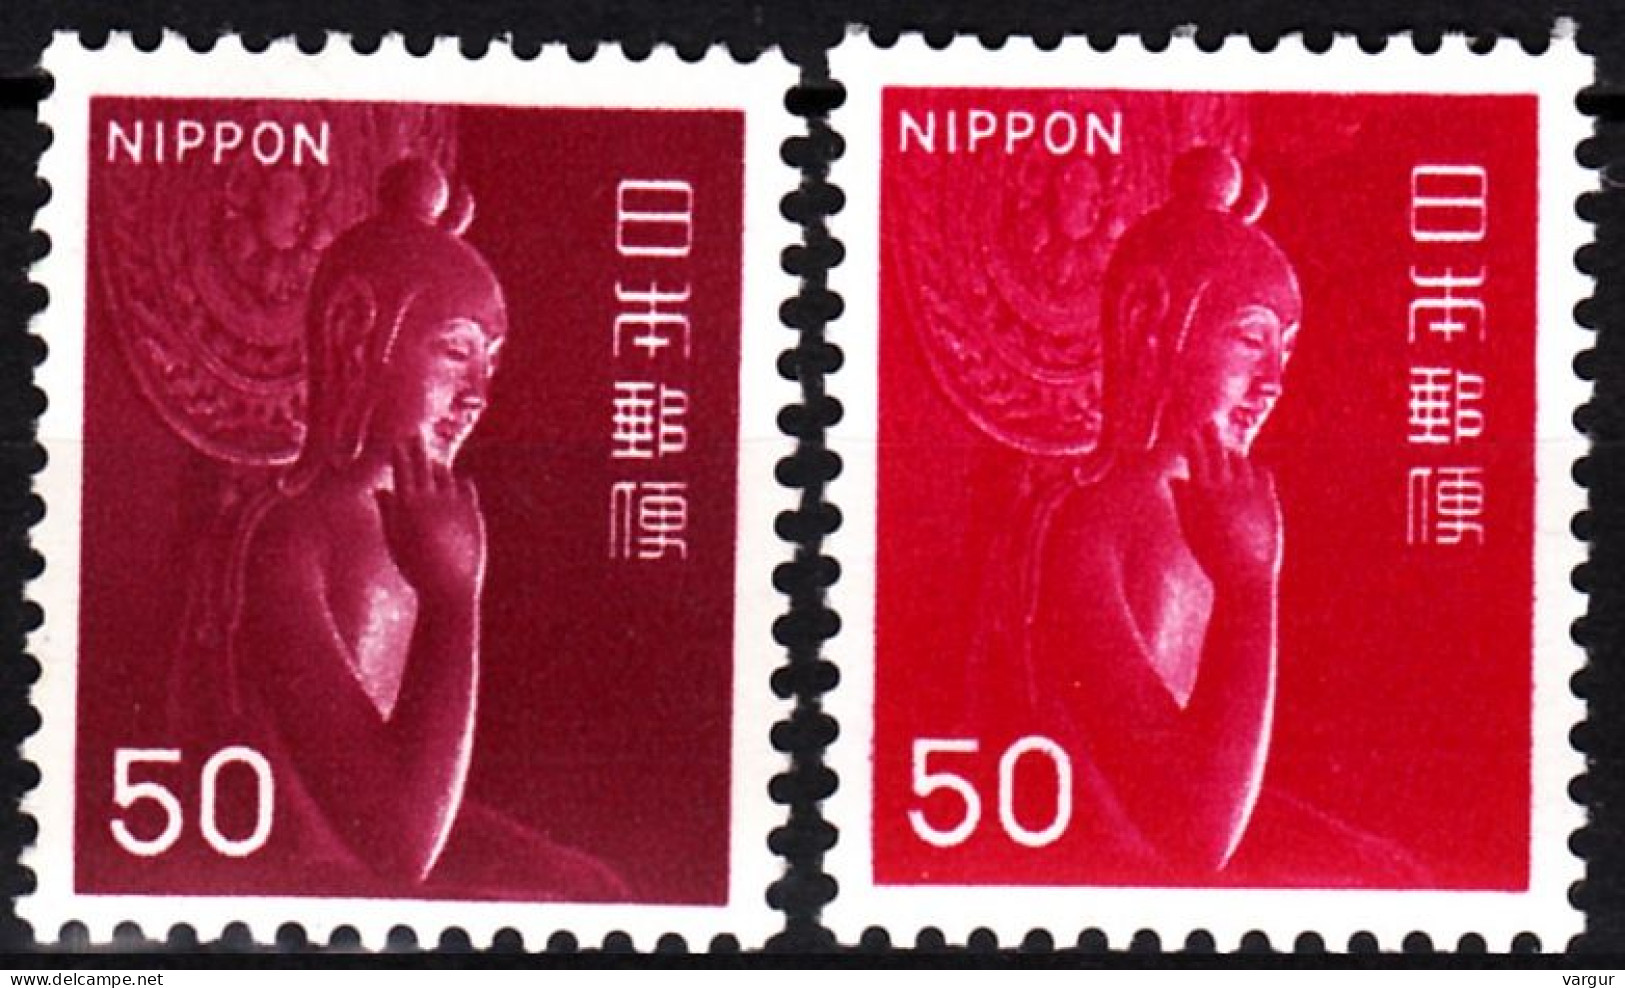 JAPAN 1966-67 Definitive With NIPPON: ART. Miroku Wooden Statue 50Y, 2 Types, MNH - Sculpture